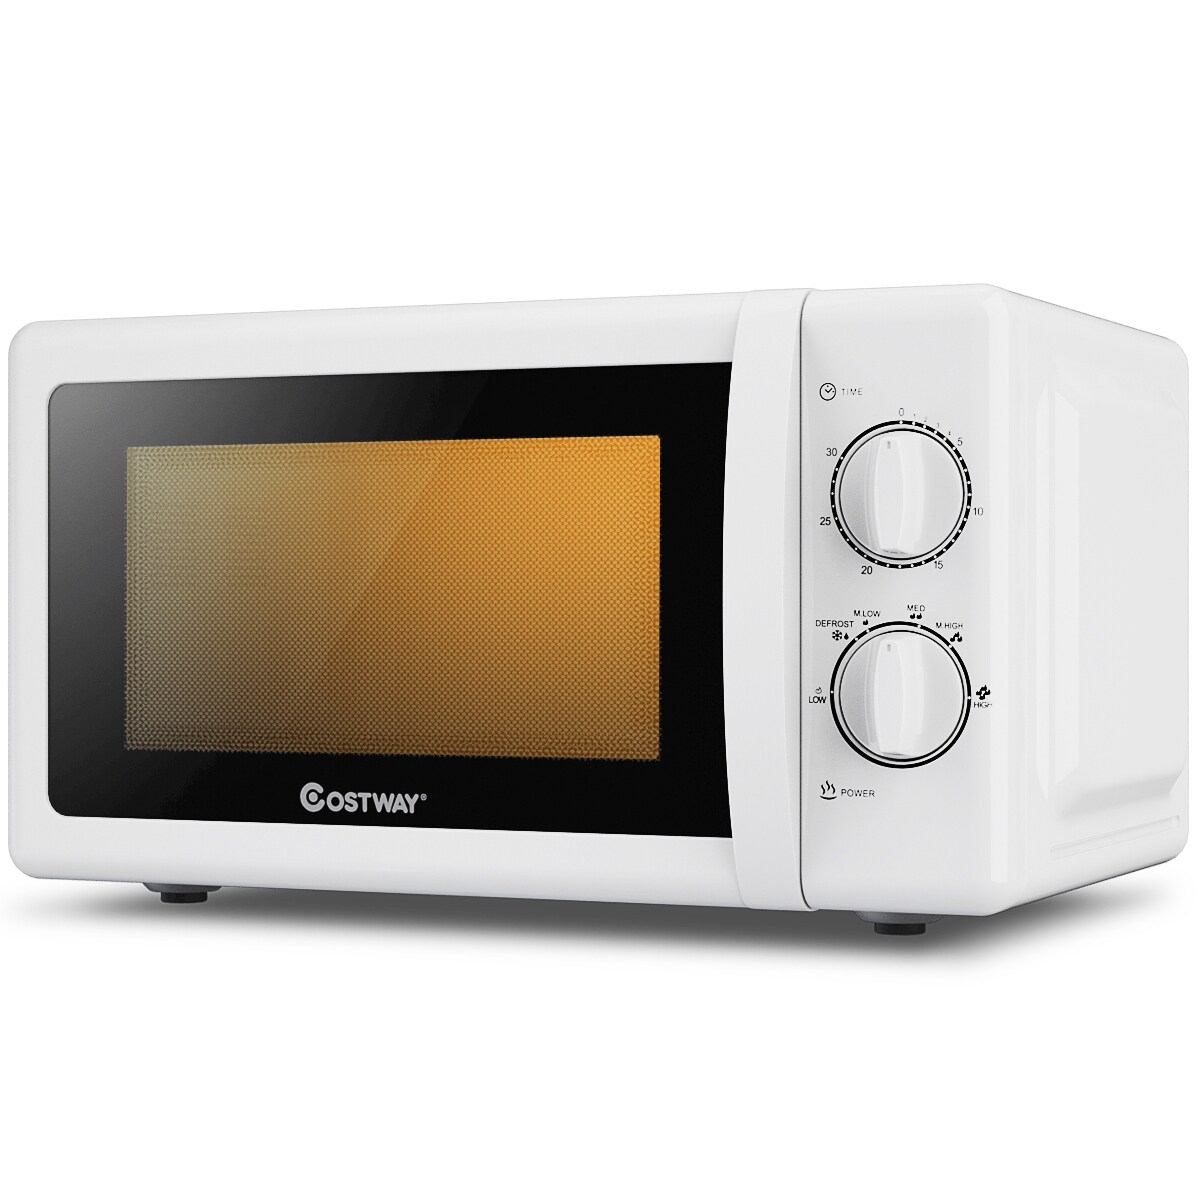 https://ak1.ostkcdn.com/images/products/is/images/direct/40bdbbe9d014d1fbc13e7eca705e6b7226c7f766/Costway-Retro-Countertop-Microwave-Oven-0.7-Cubic-Feet-700W-Rotary.jpg